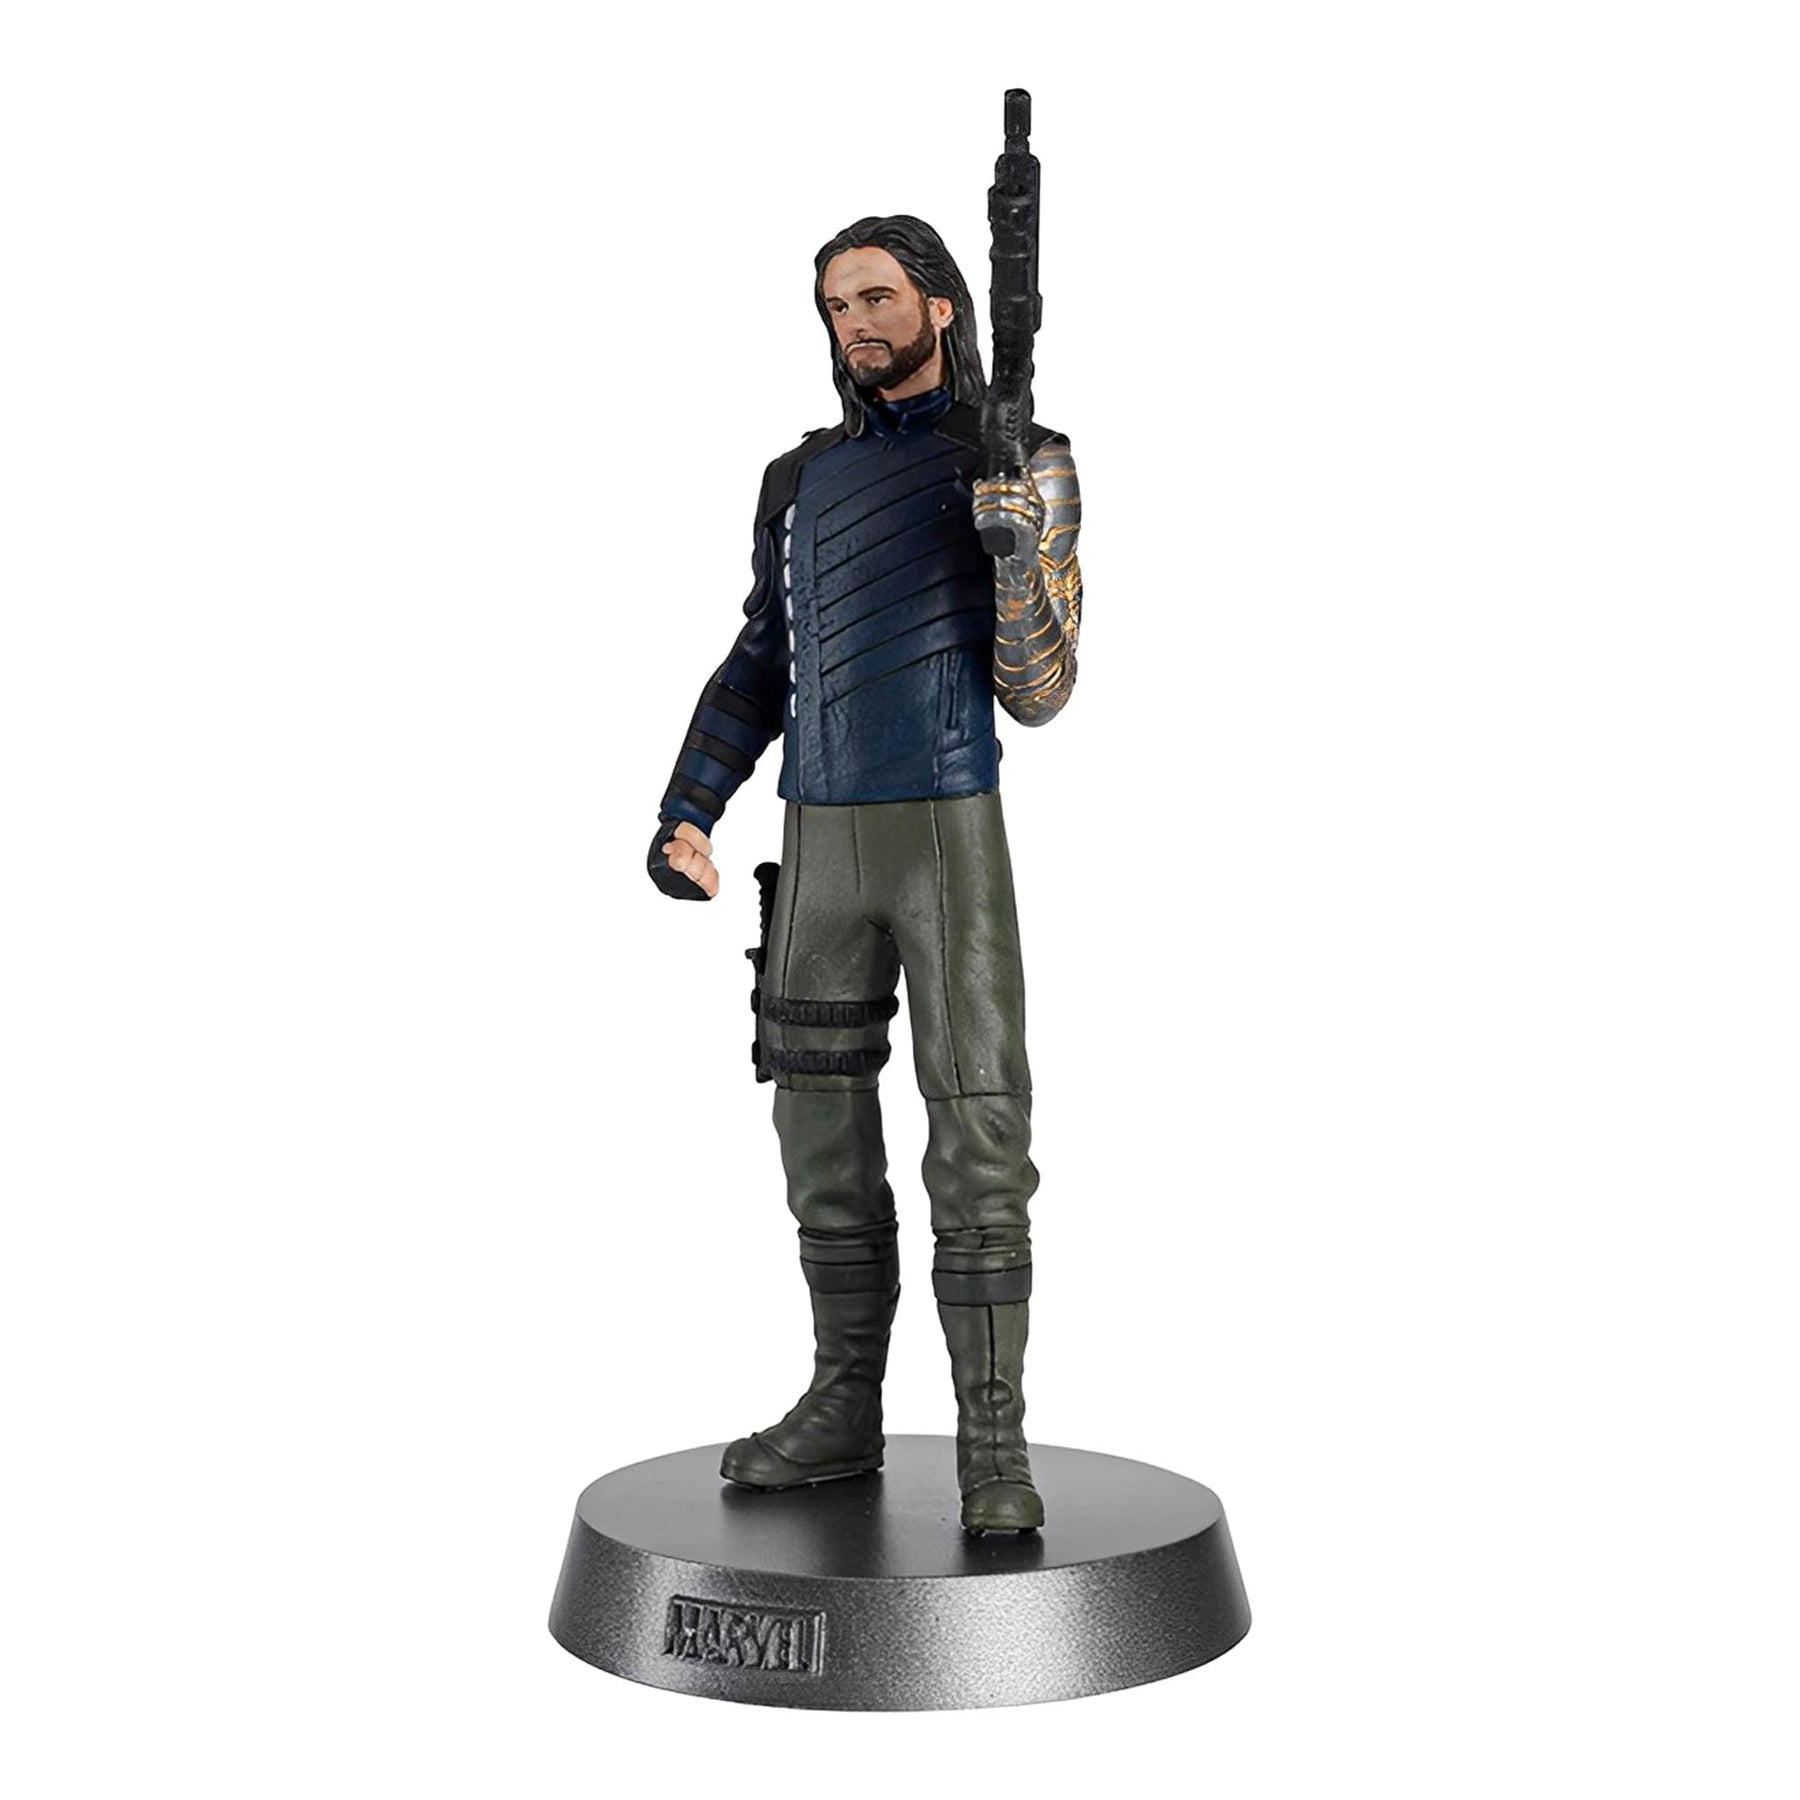 Marvel Heavyweights 1:18 Scale Metal Statue | 014 Winter Soldier